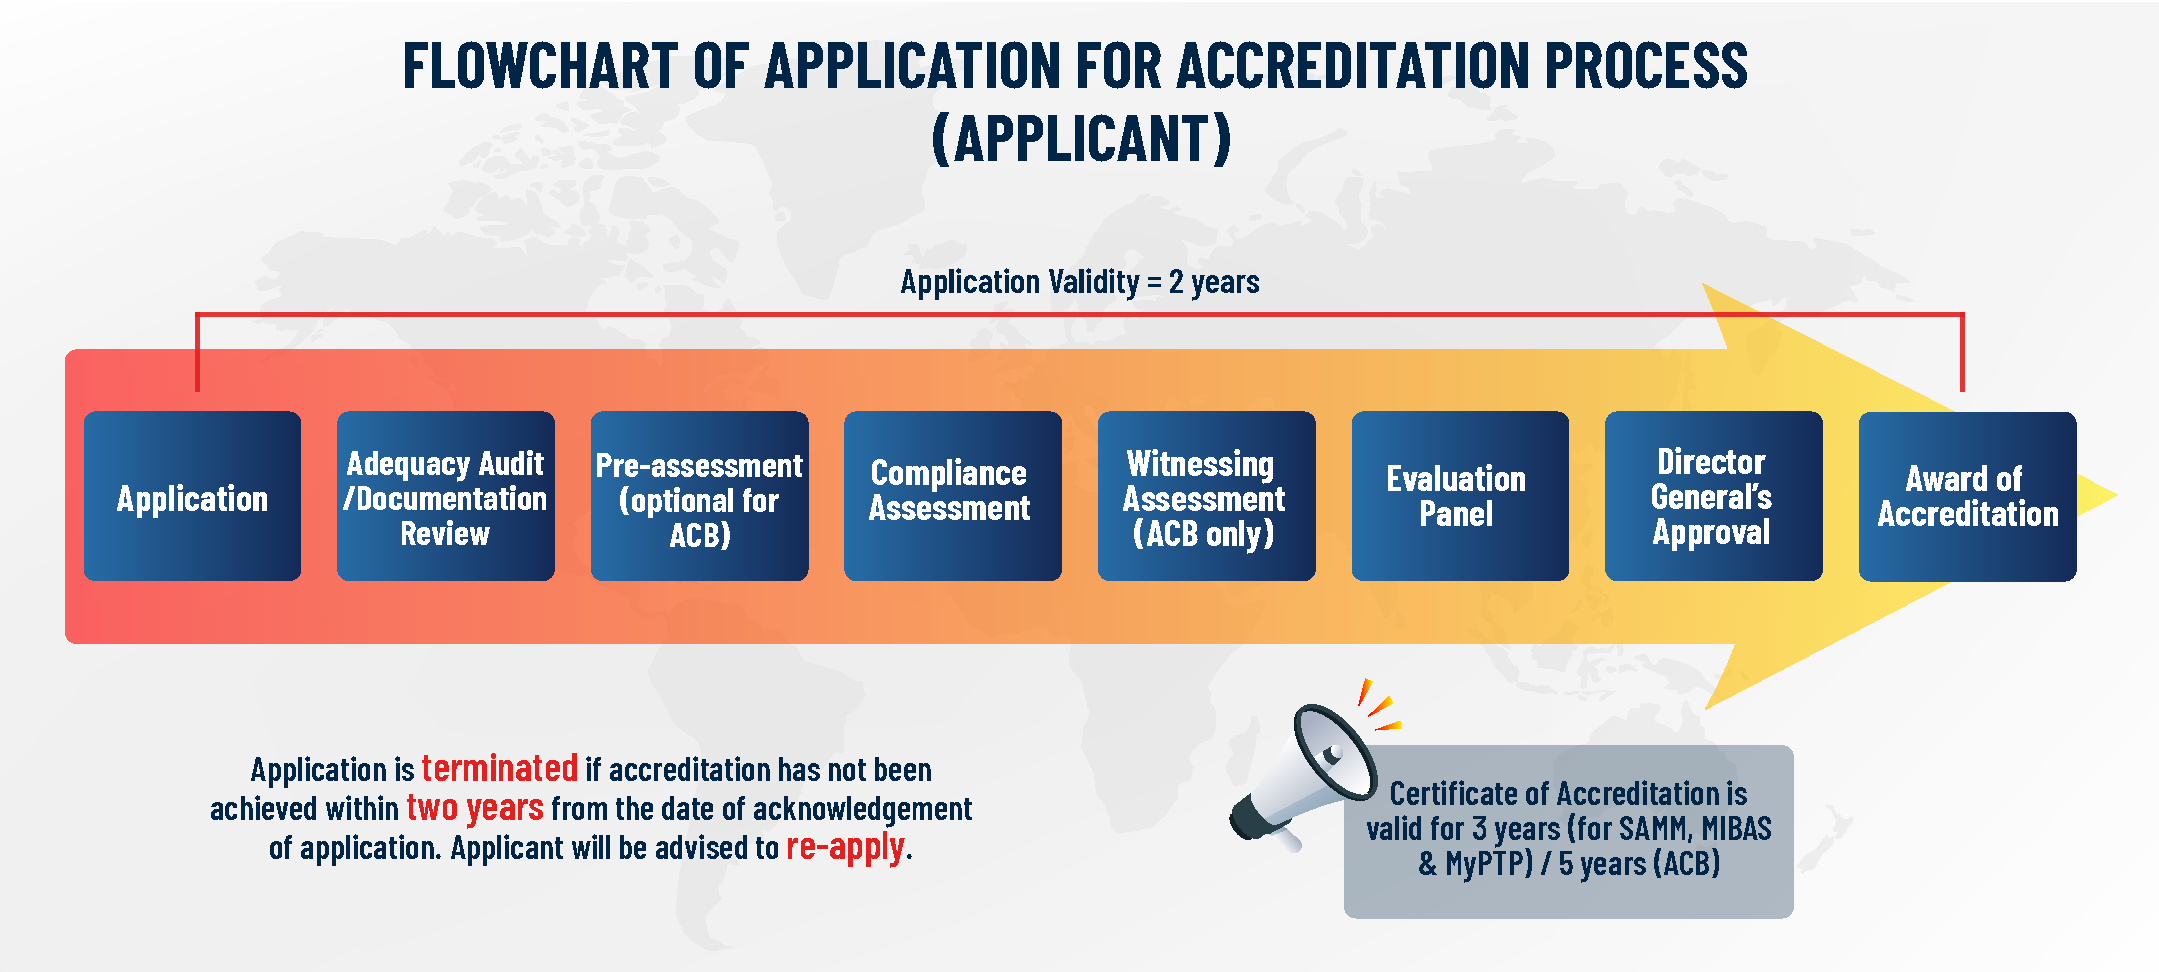 Flowchart of Accreditation Prosess Applicant